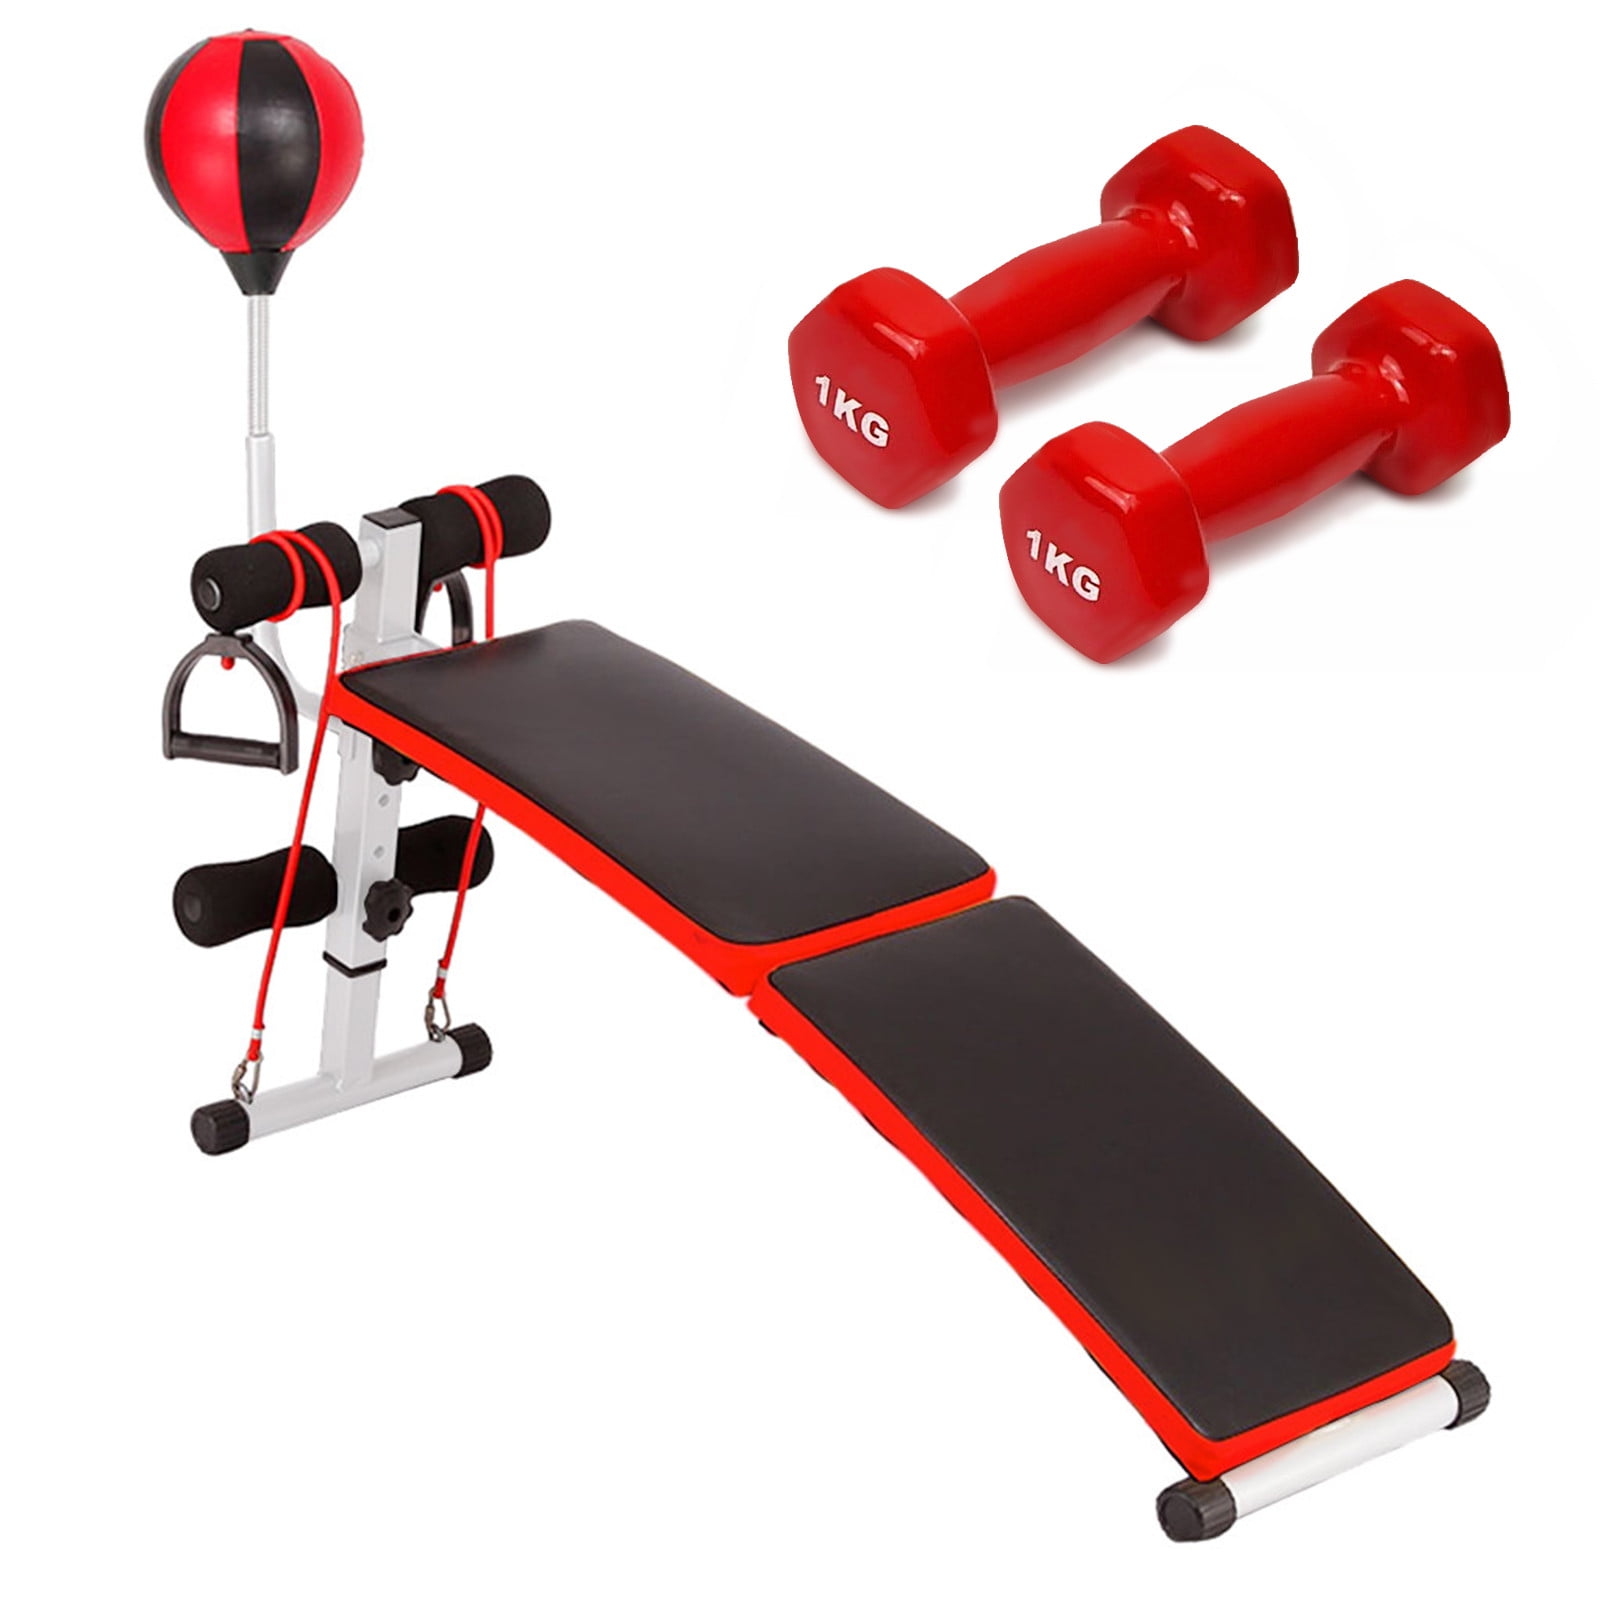 Details about   Sit Up Bench Decline Abdominal Fitness Home Gym AB Workout Exercise Equipment US 